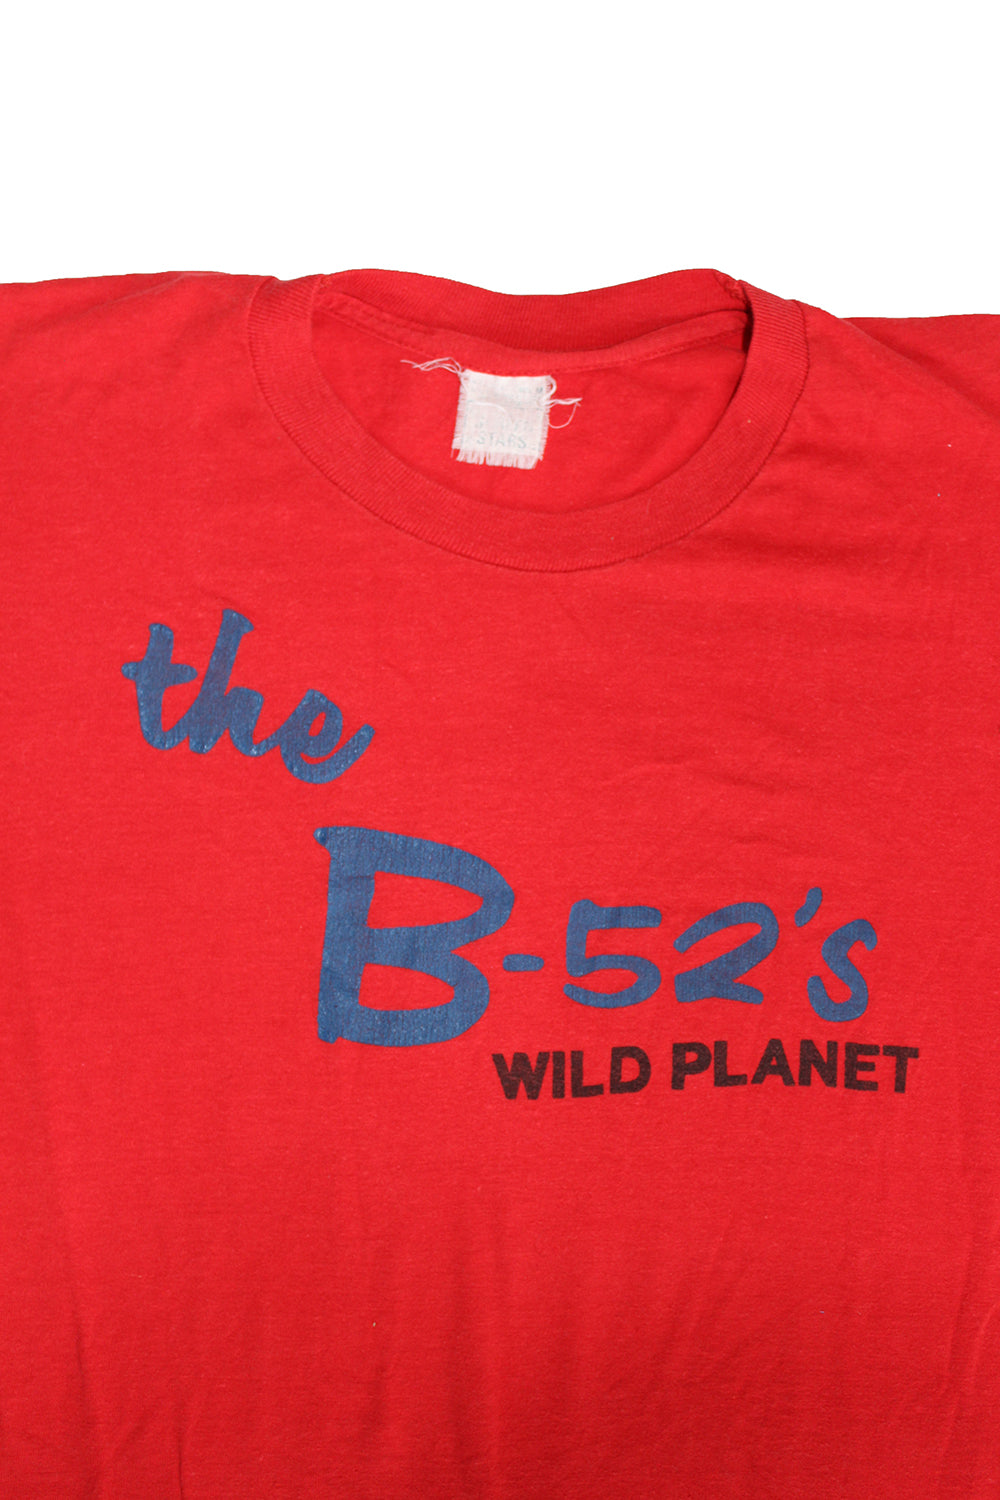 Vintage 80&#39;s B-52&#39;s Wild Planet T-shirt ///SOLD///